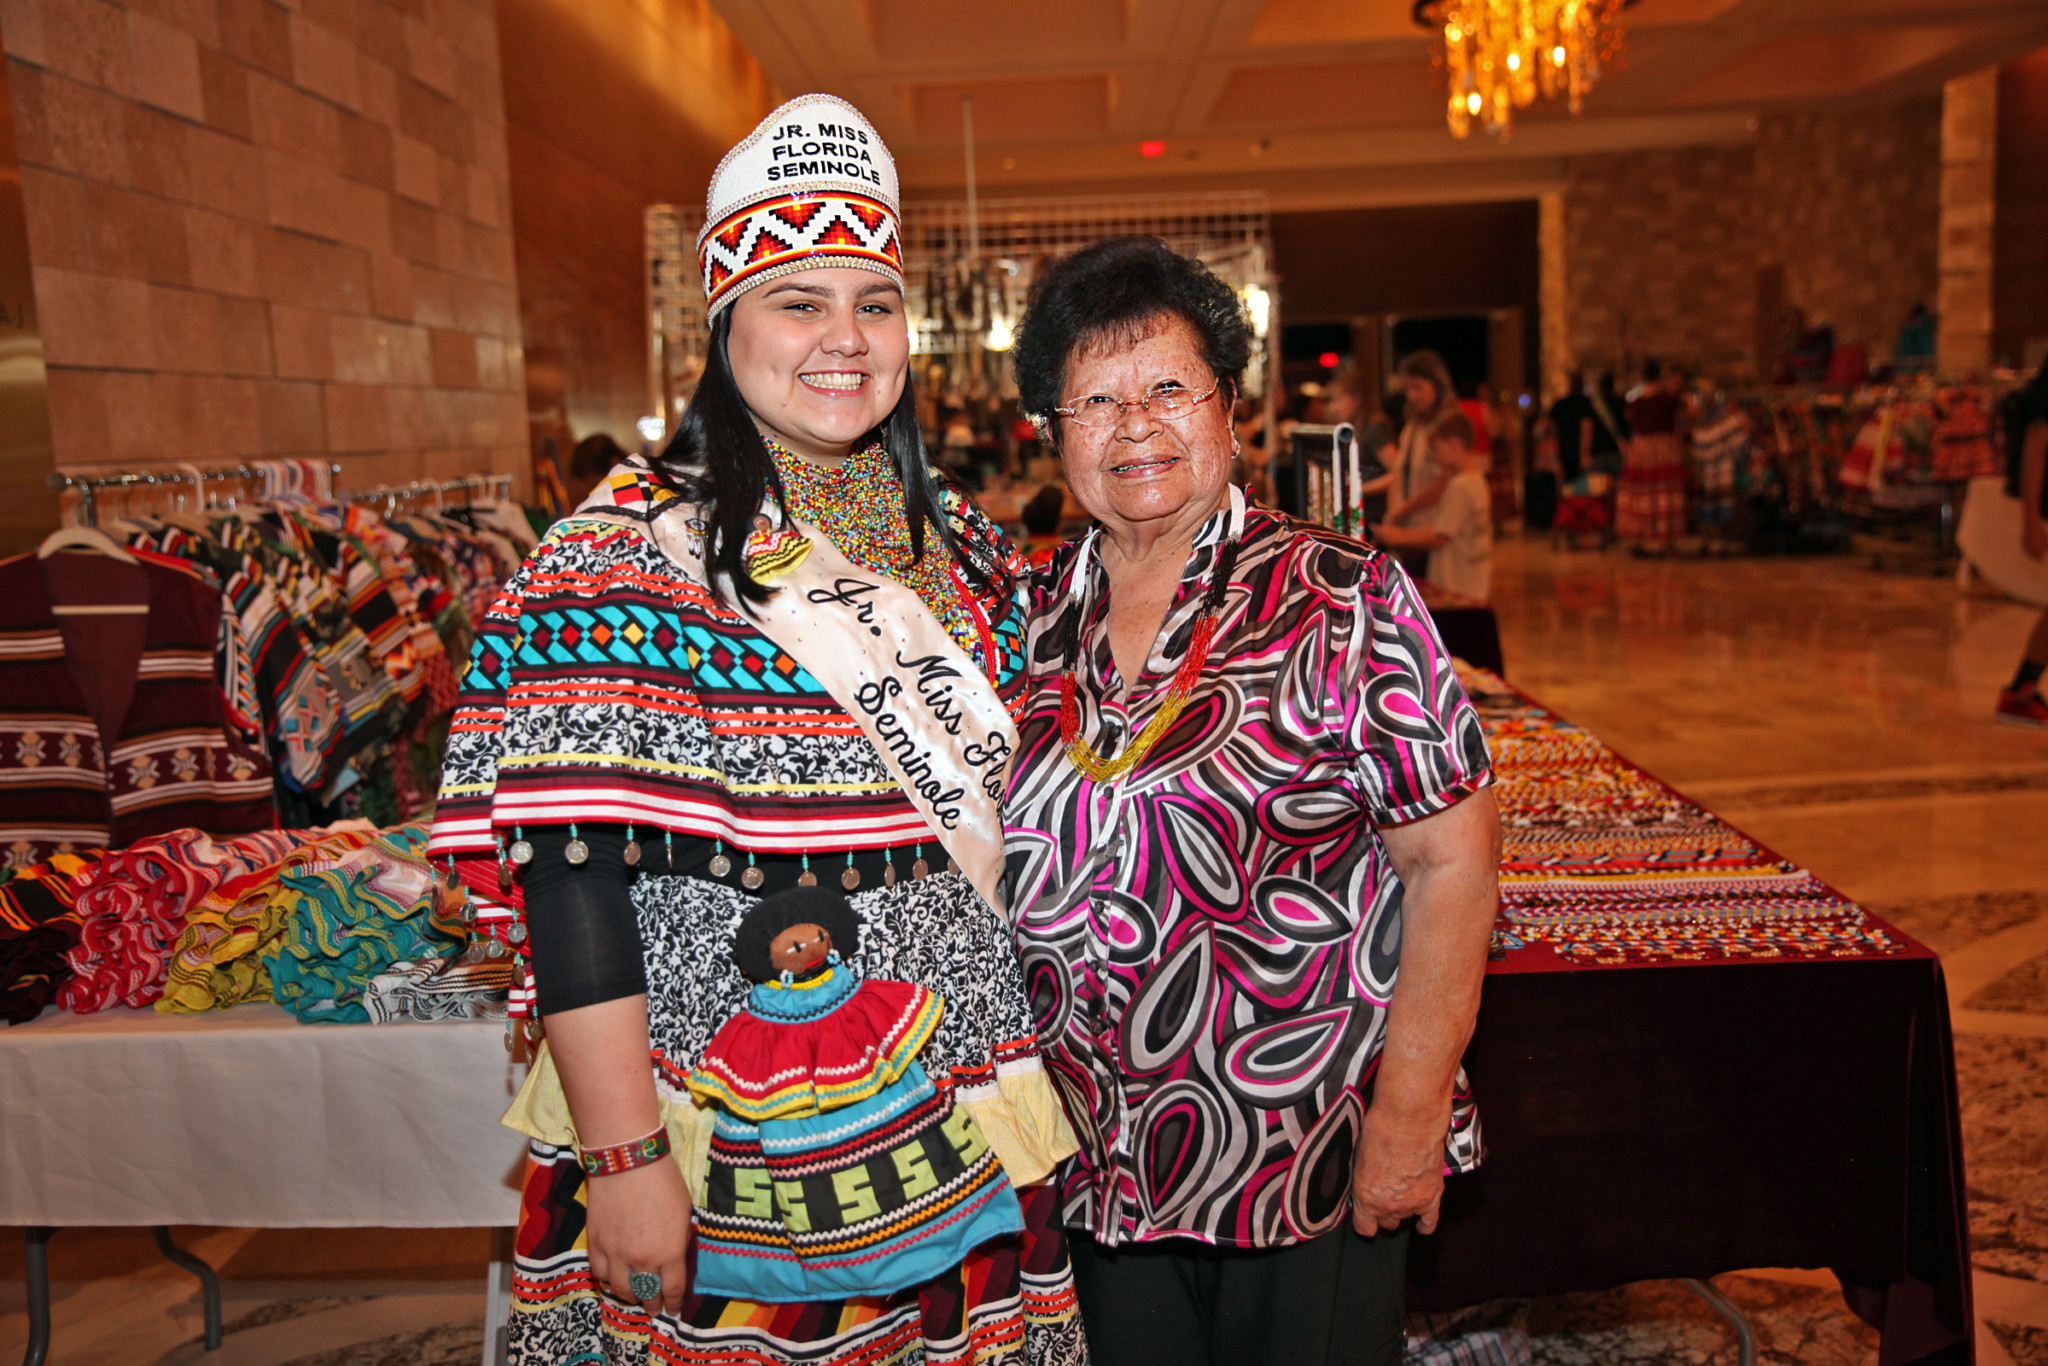 Dancers, drummers, pageantry highlight Seminole Tribal Fair and Pow Wow